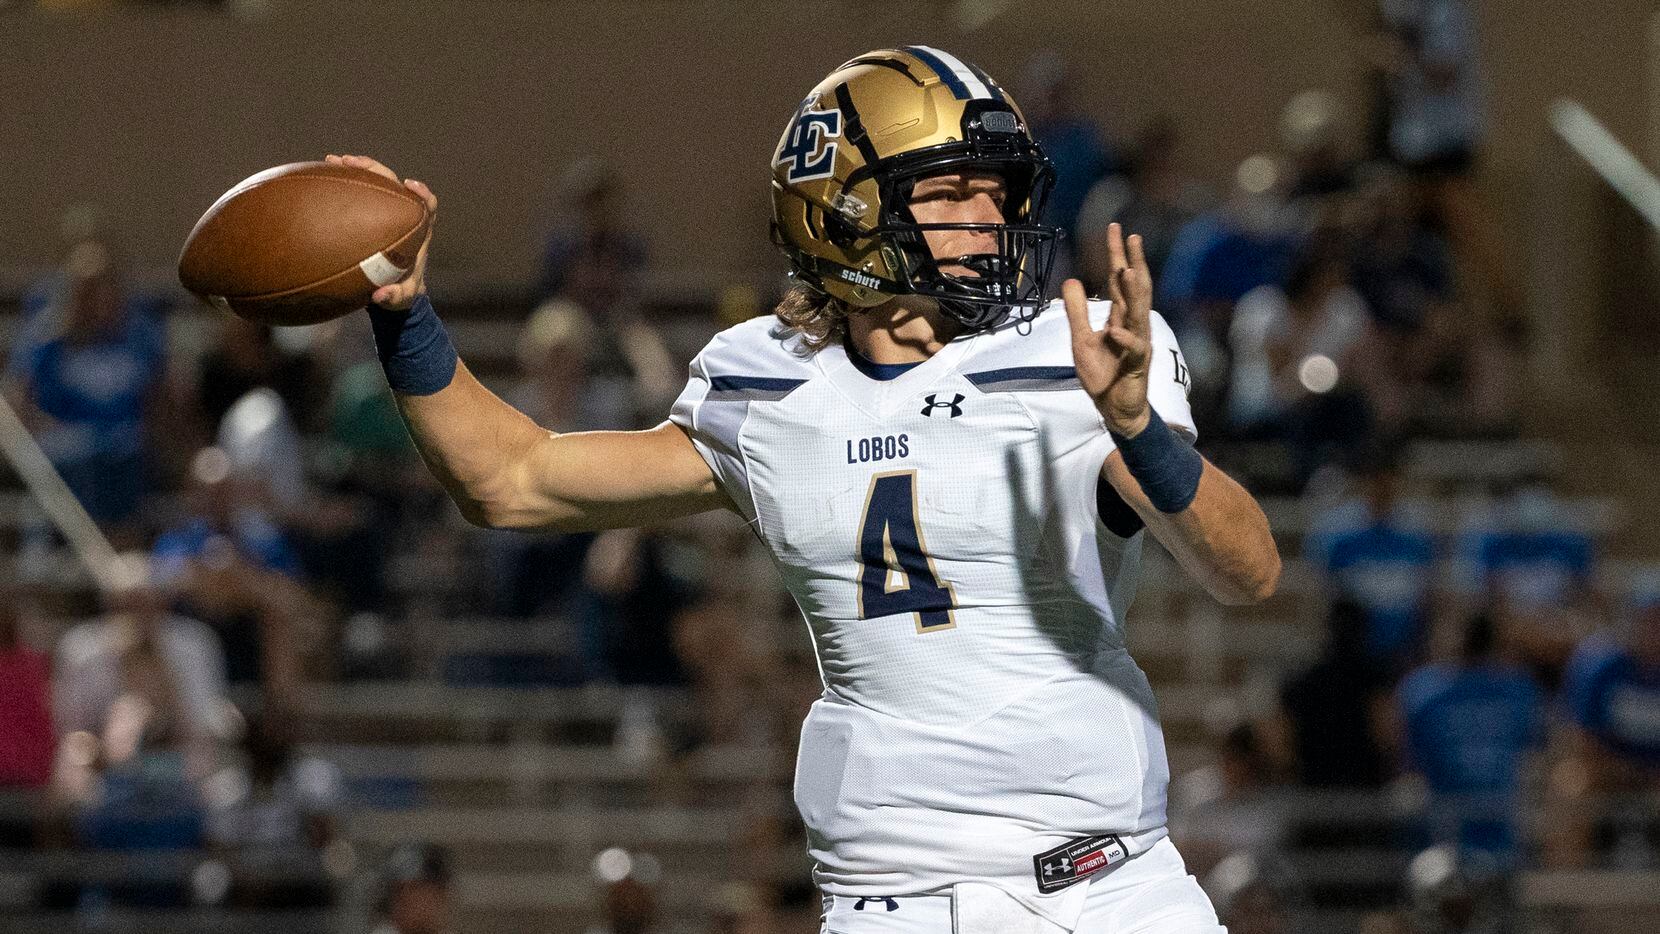 Little Elm senior quarterback John Mateer (4) throws a pass during the first half of a high school football game against Plano West on Friday, Sept. 10, 2021 at John Clark Stadium in Plano, Texas. (Jeffrey McWhorter/Special Contributor)